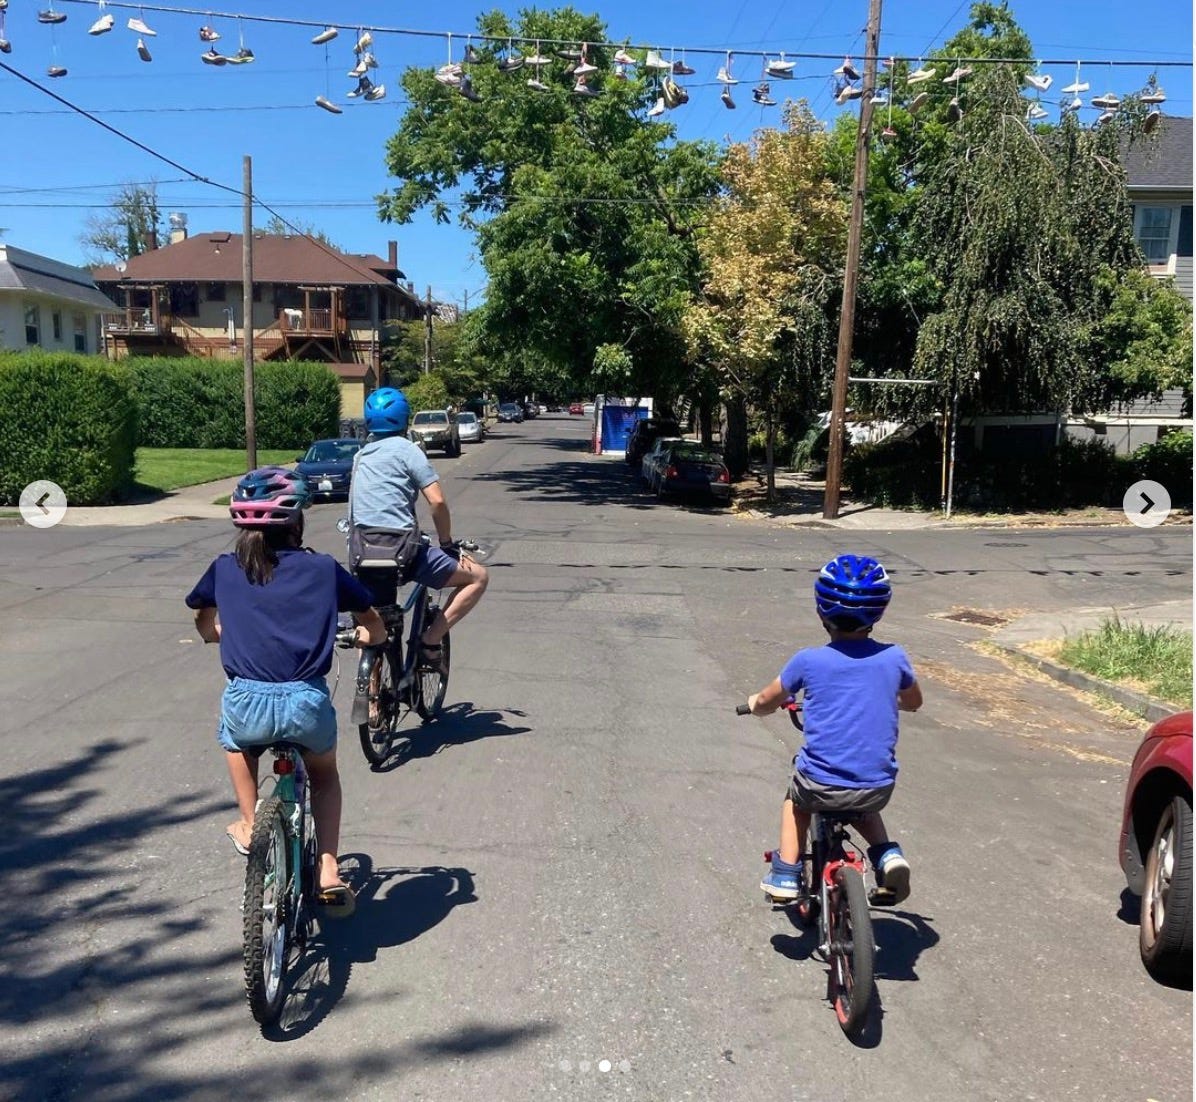 A photo taken by Nicolai which captures her husband, son and daughter all riding their own bikes on a residential street in Portland